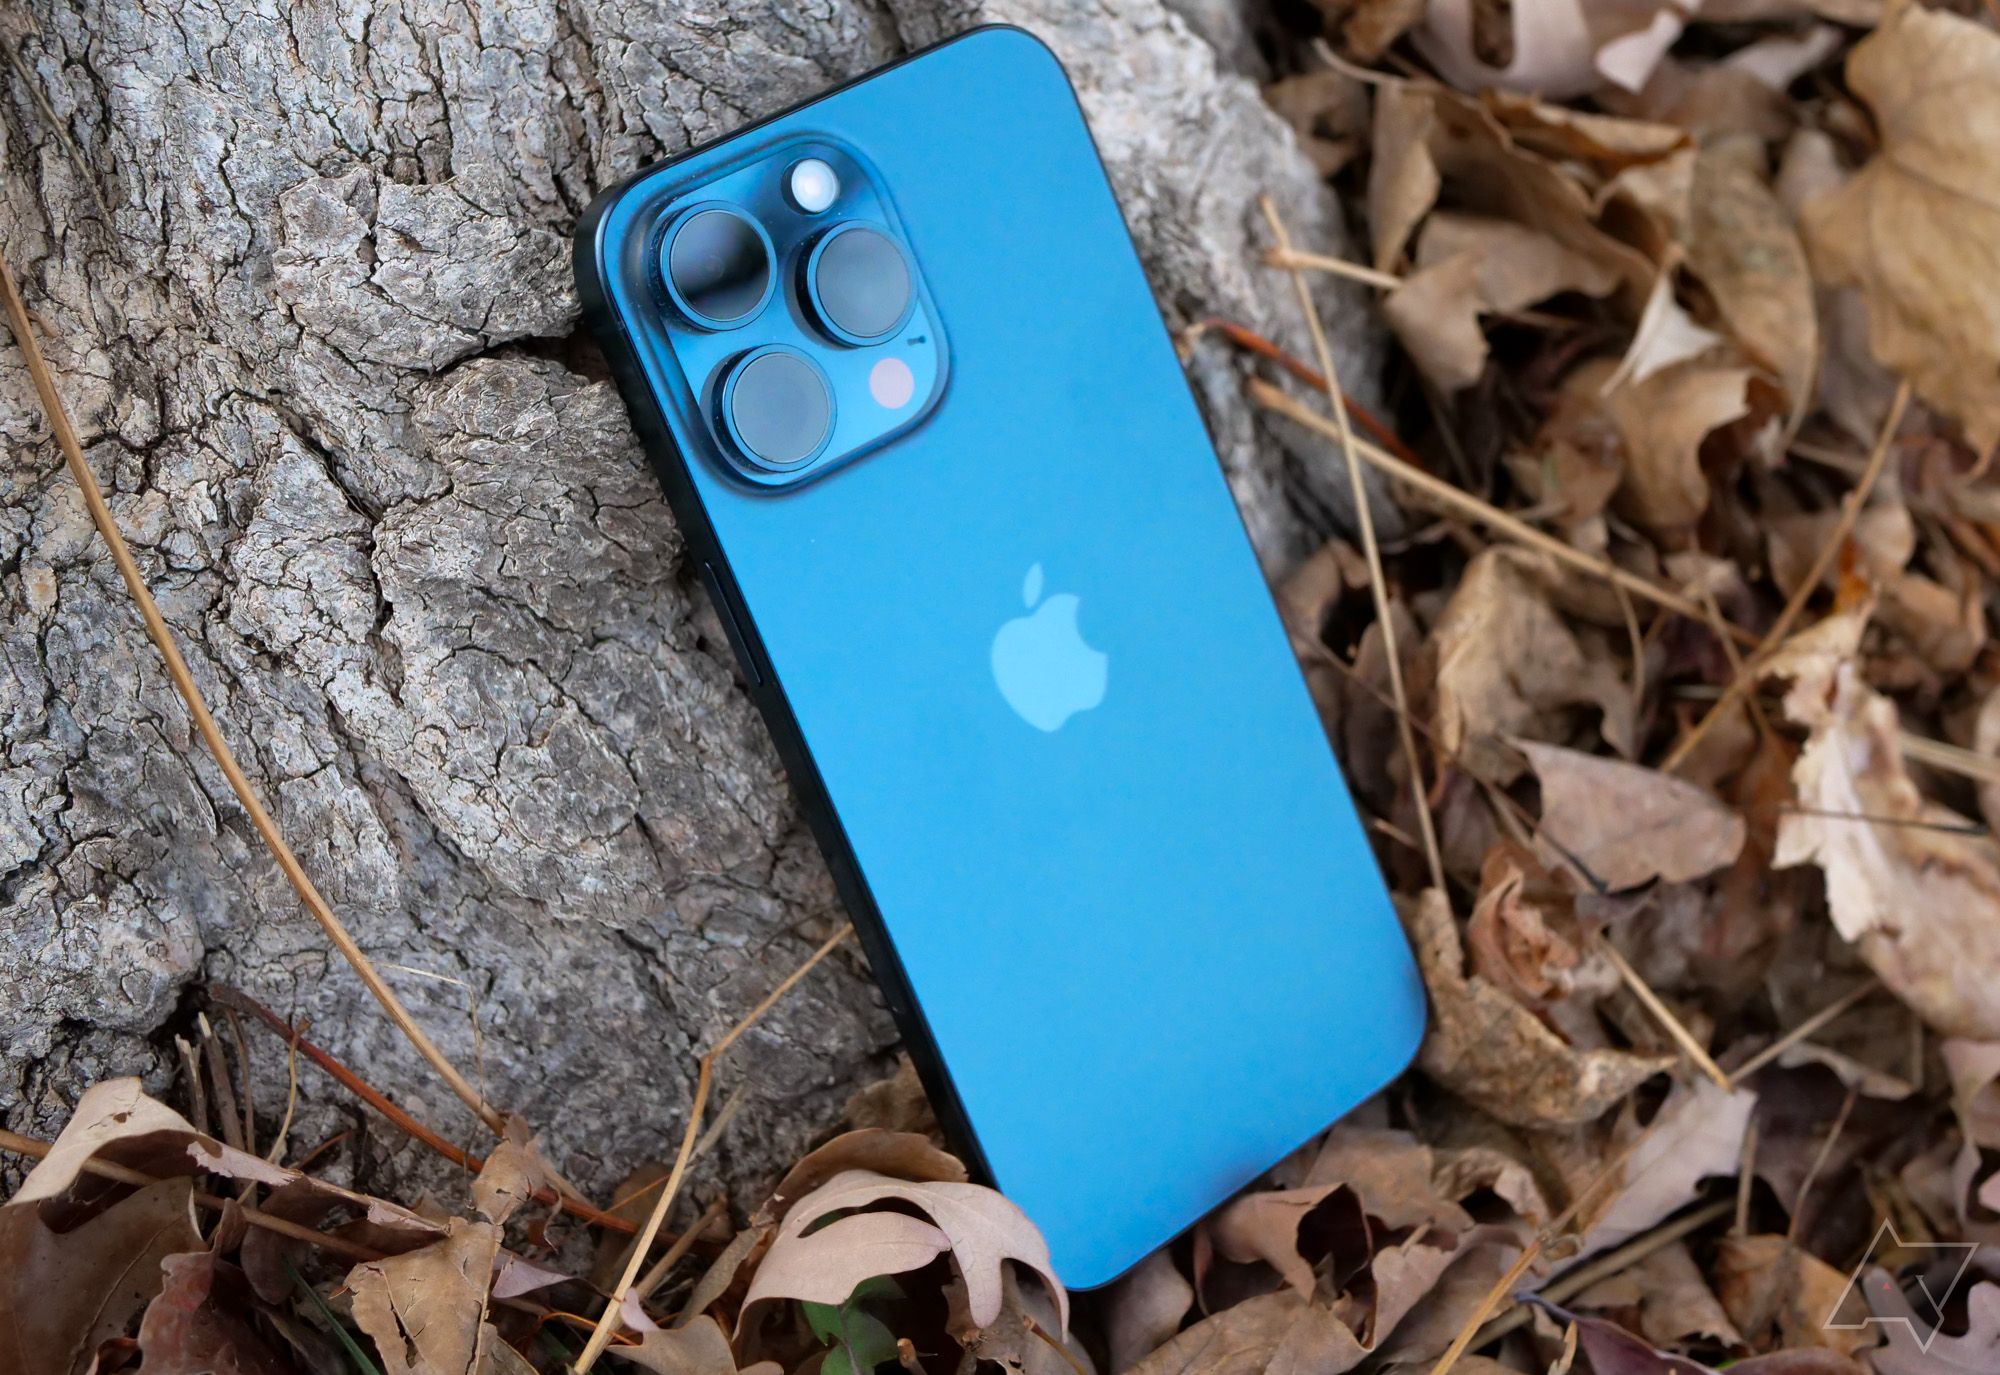 iPhone 15 Pro review: Better, but not very exciting